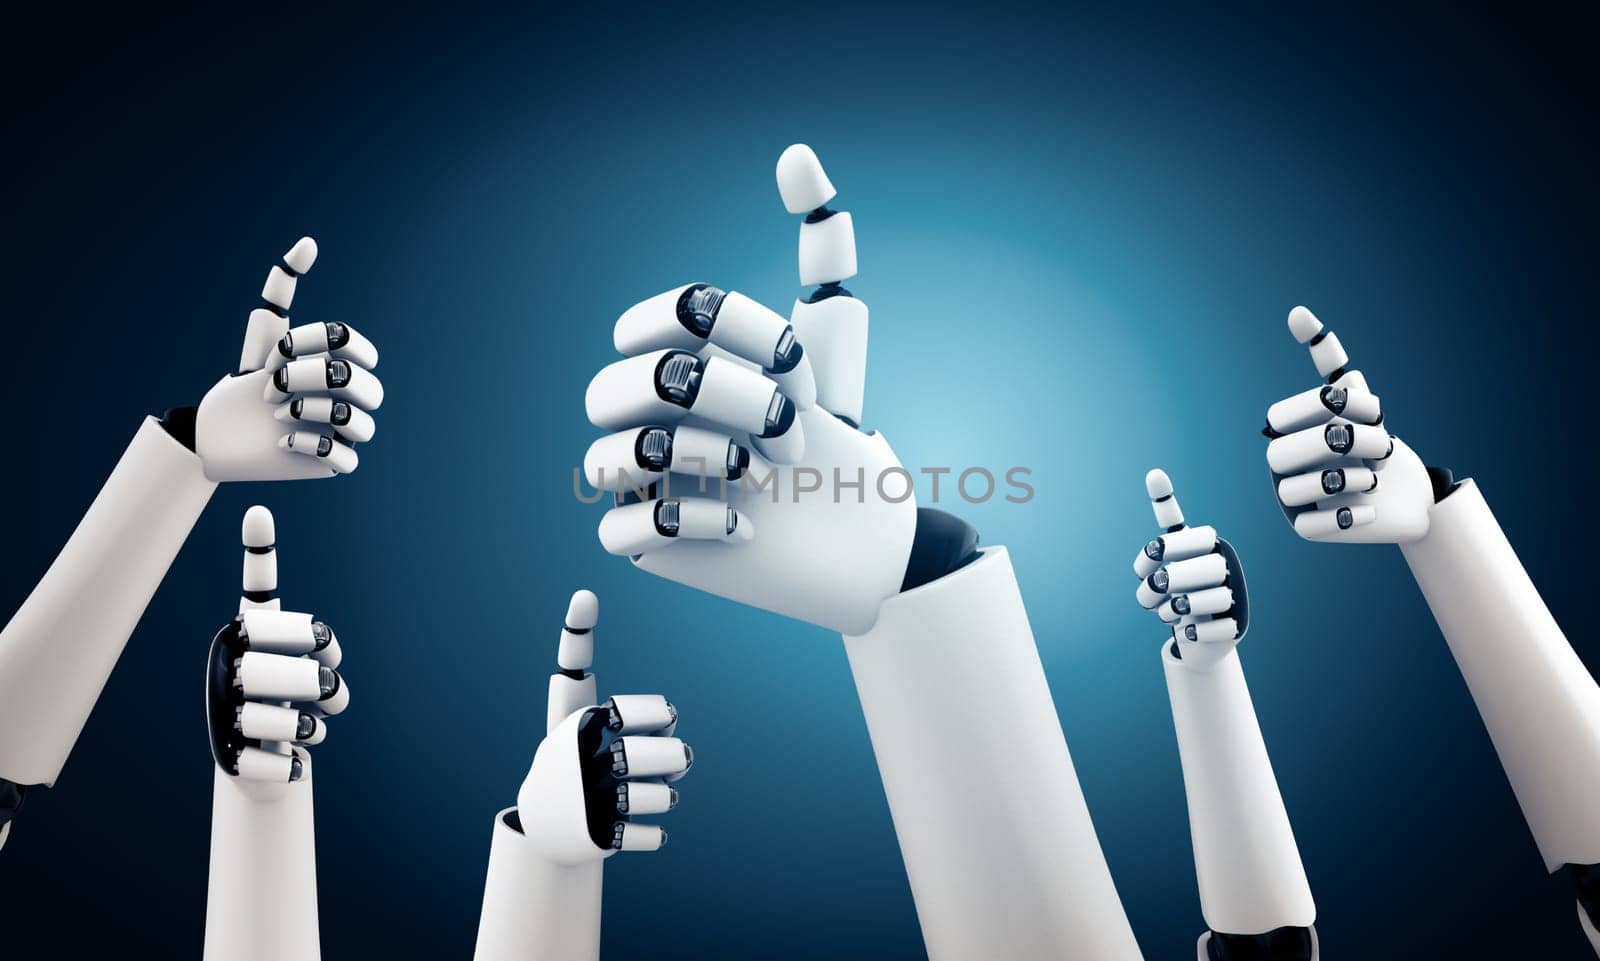 XAI 3d illustration Robot humanoid hands up to celebrate goals success achieved by using AI artificial intelligence thinking and machine learning process for the 4th industrial revolution. 3D illustration.